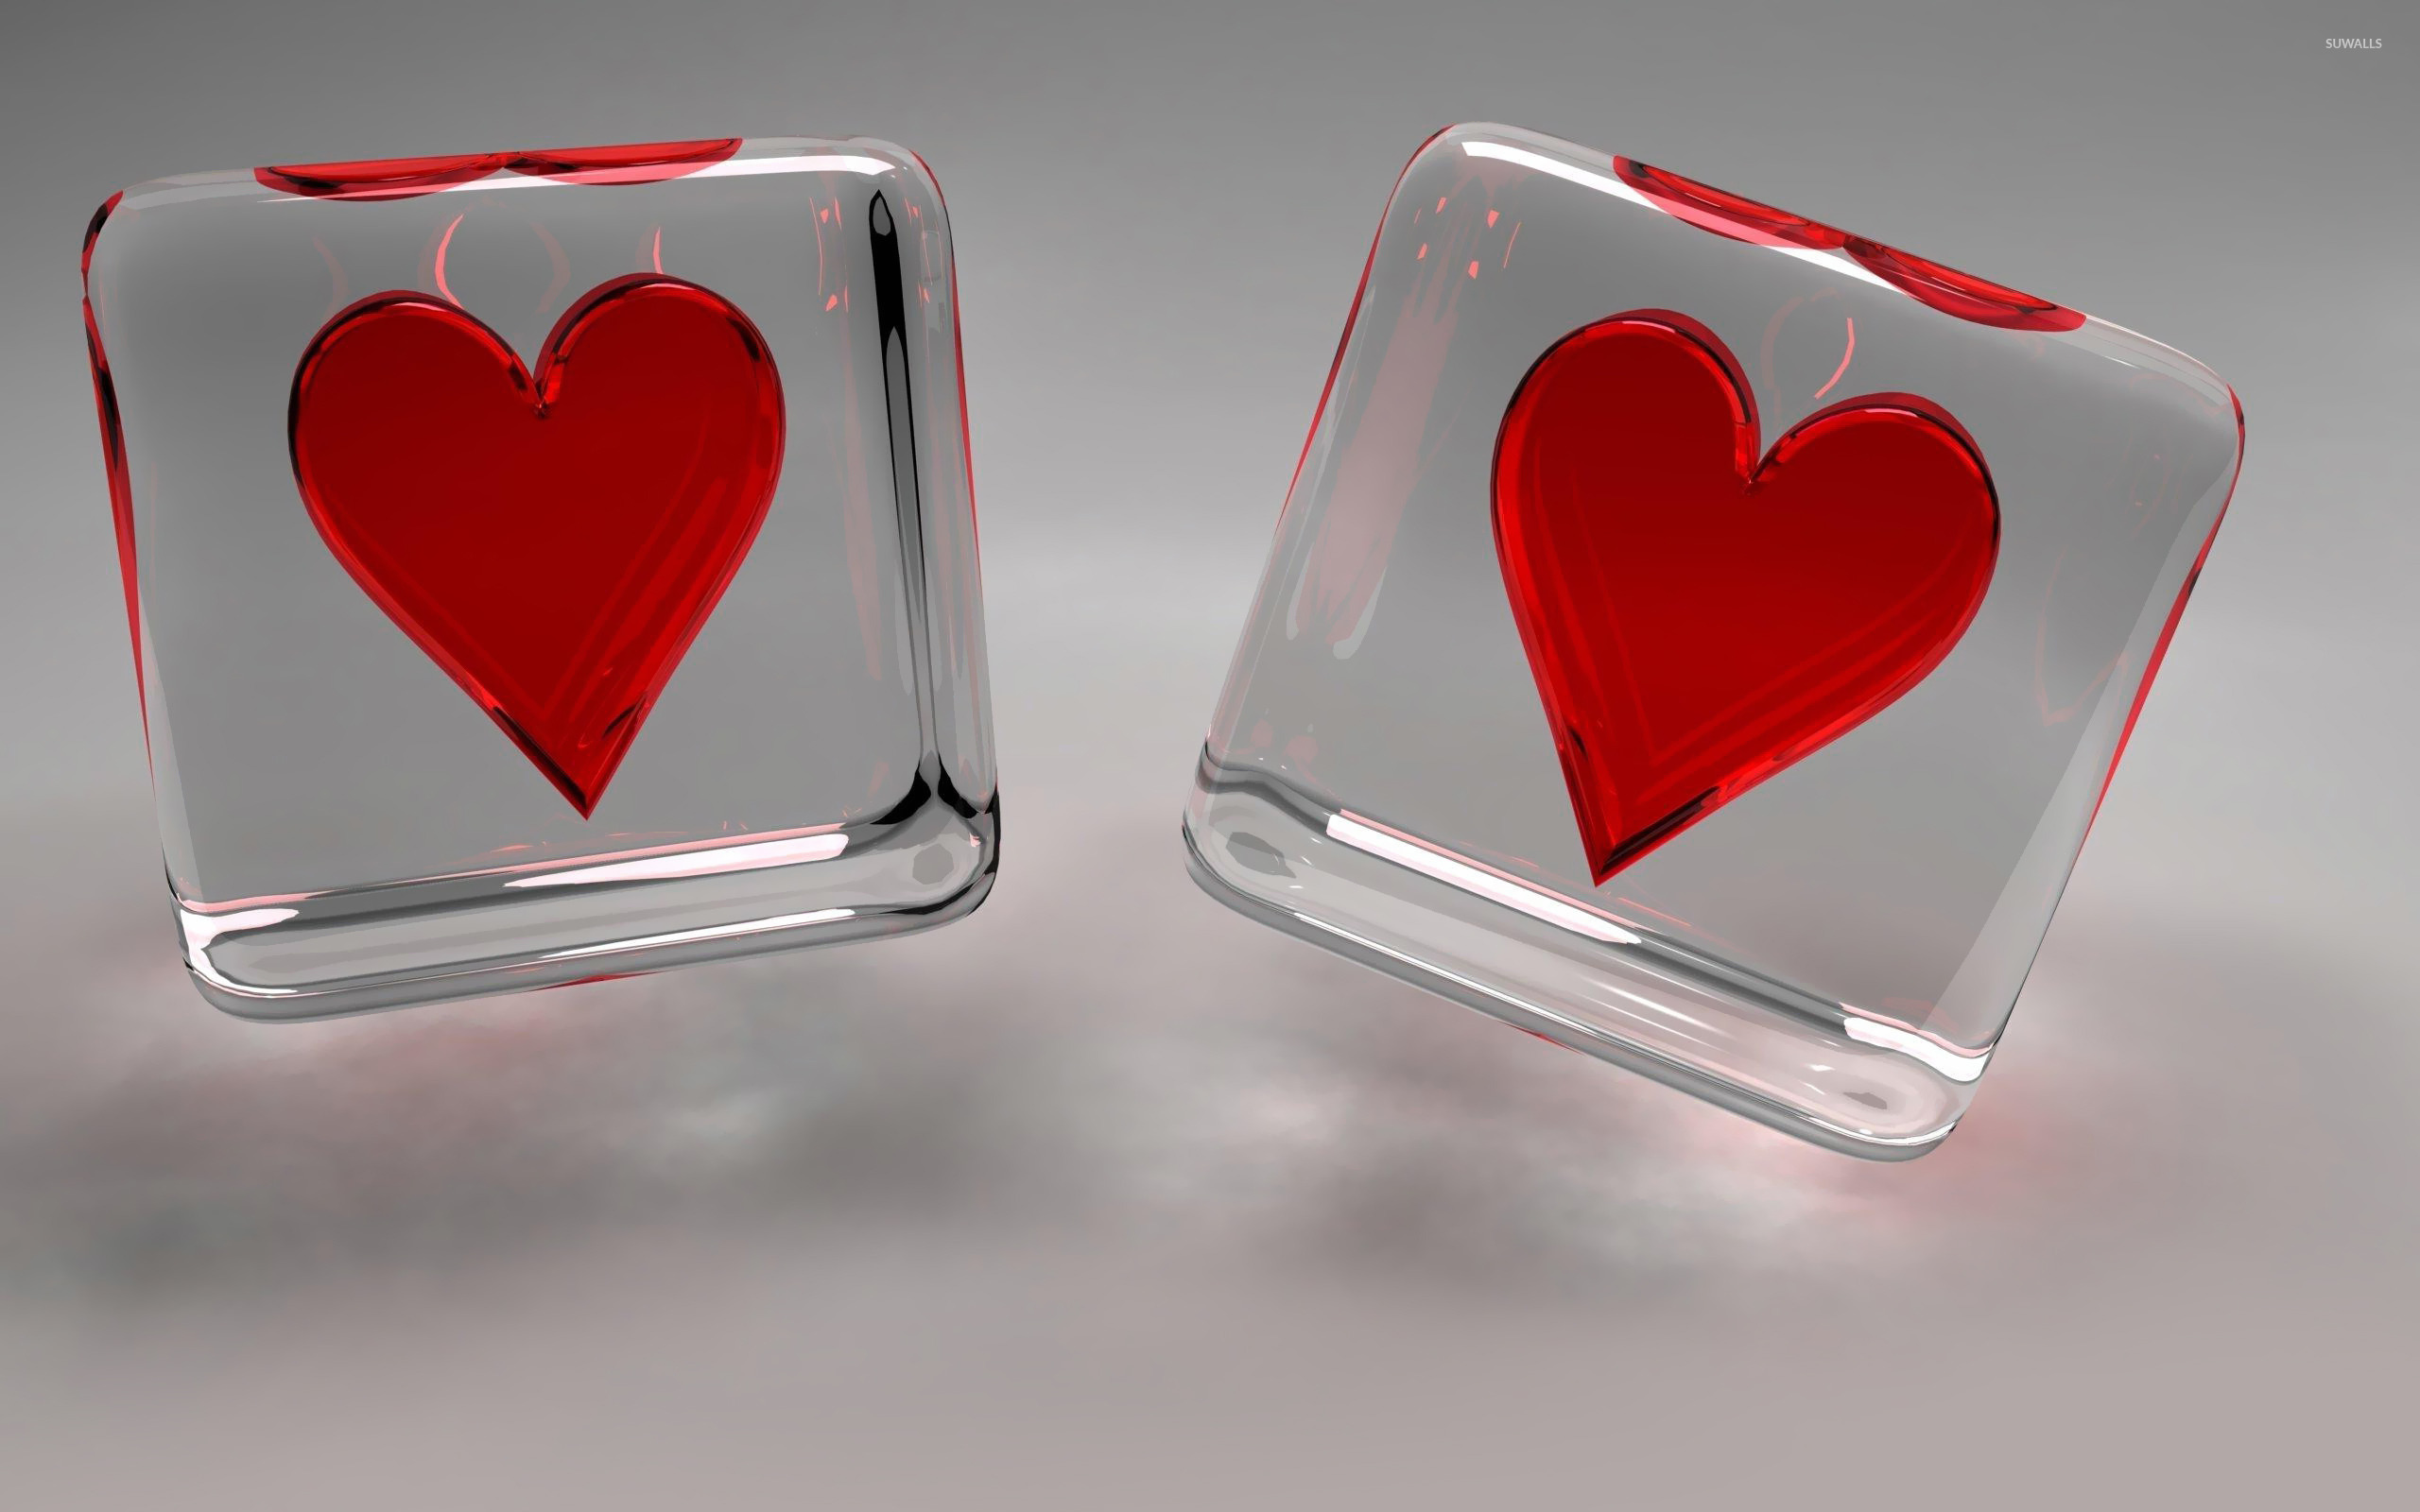 3d Love Wallpapers, 47 Free 3d Love Wallpapers Backgrounds - Love Heart  Wallpaper Background 3d - 1728x1080 Wallpaper 